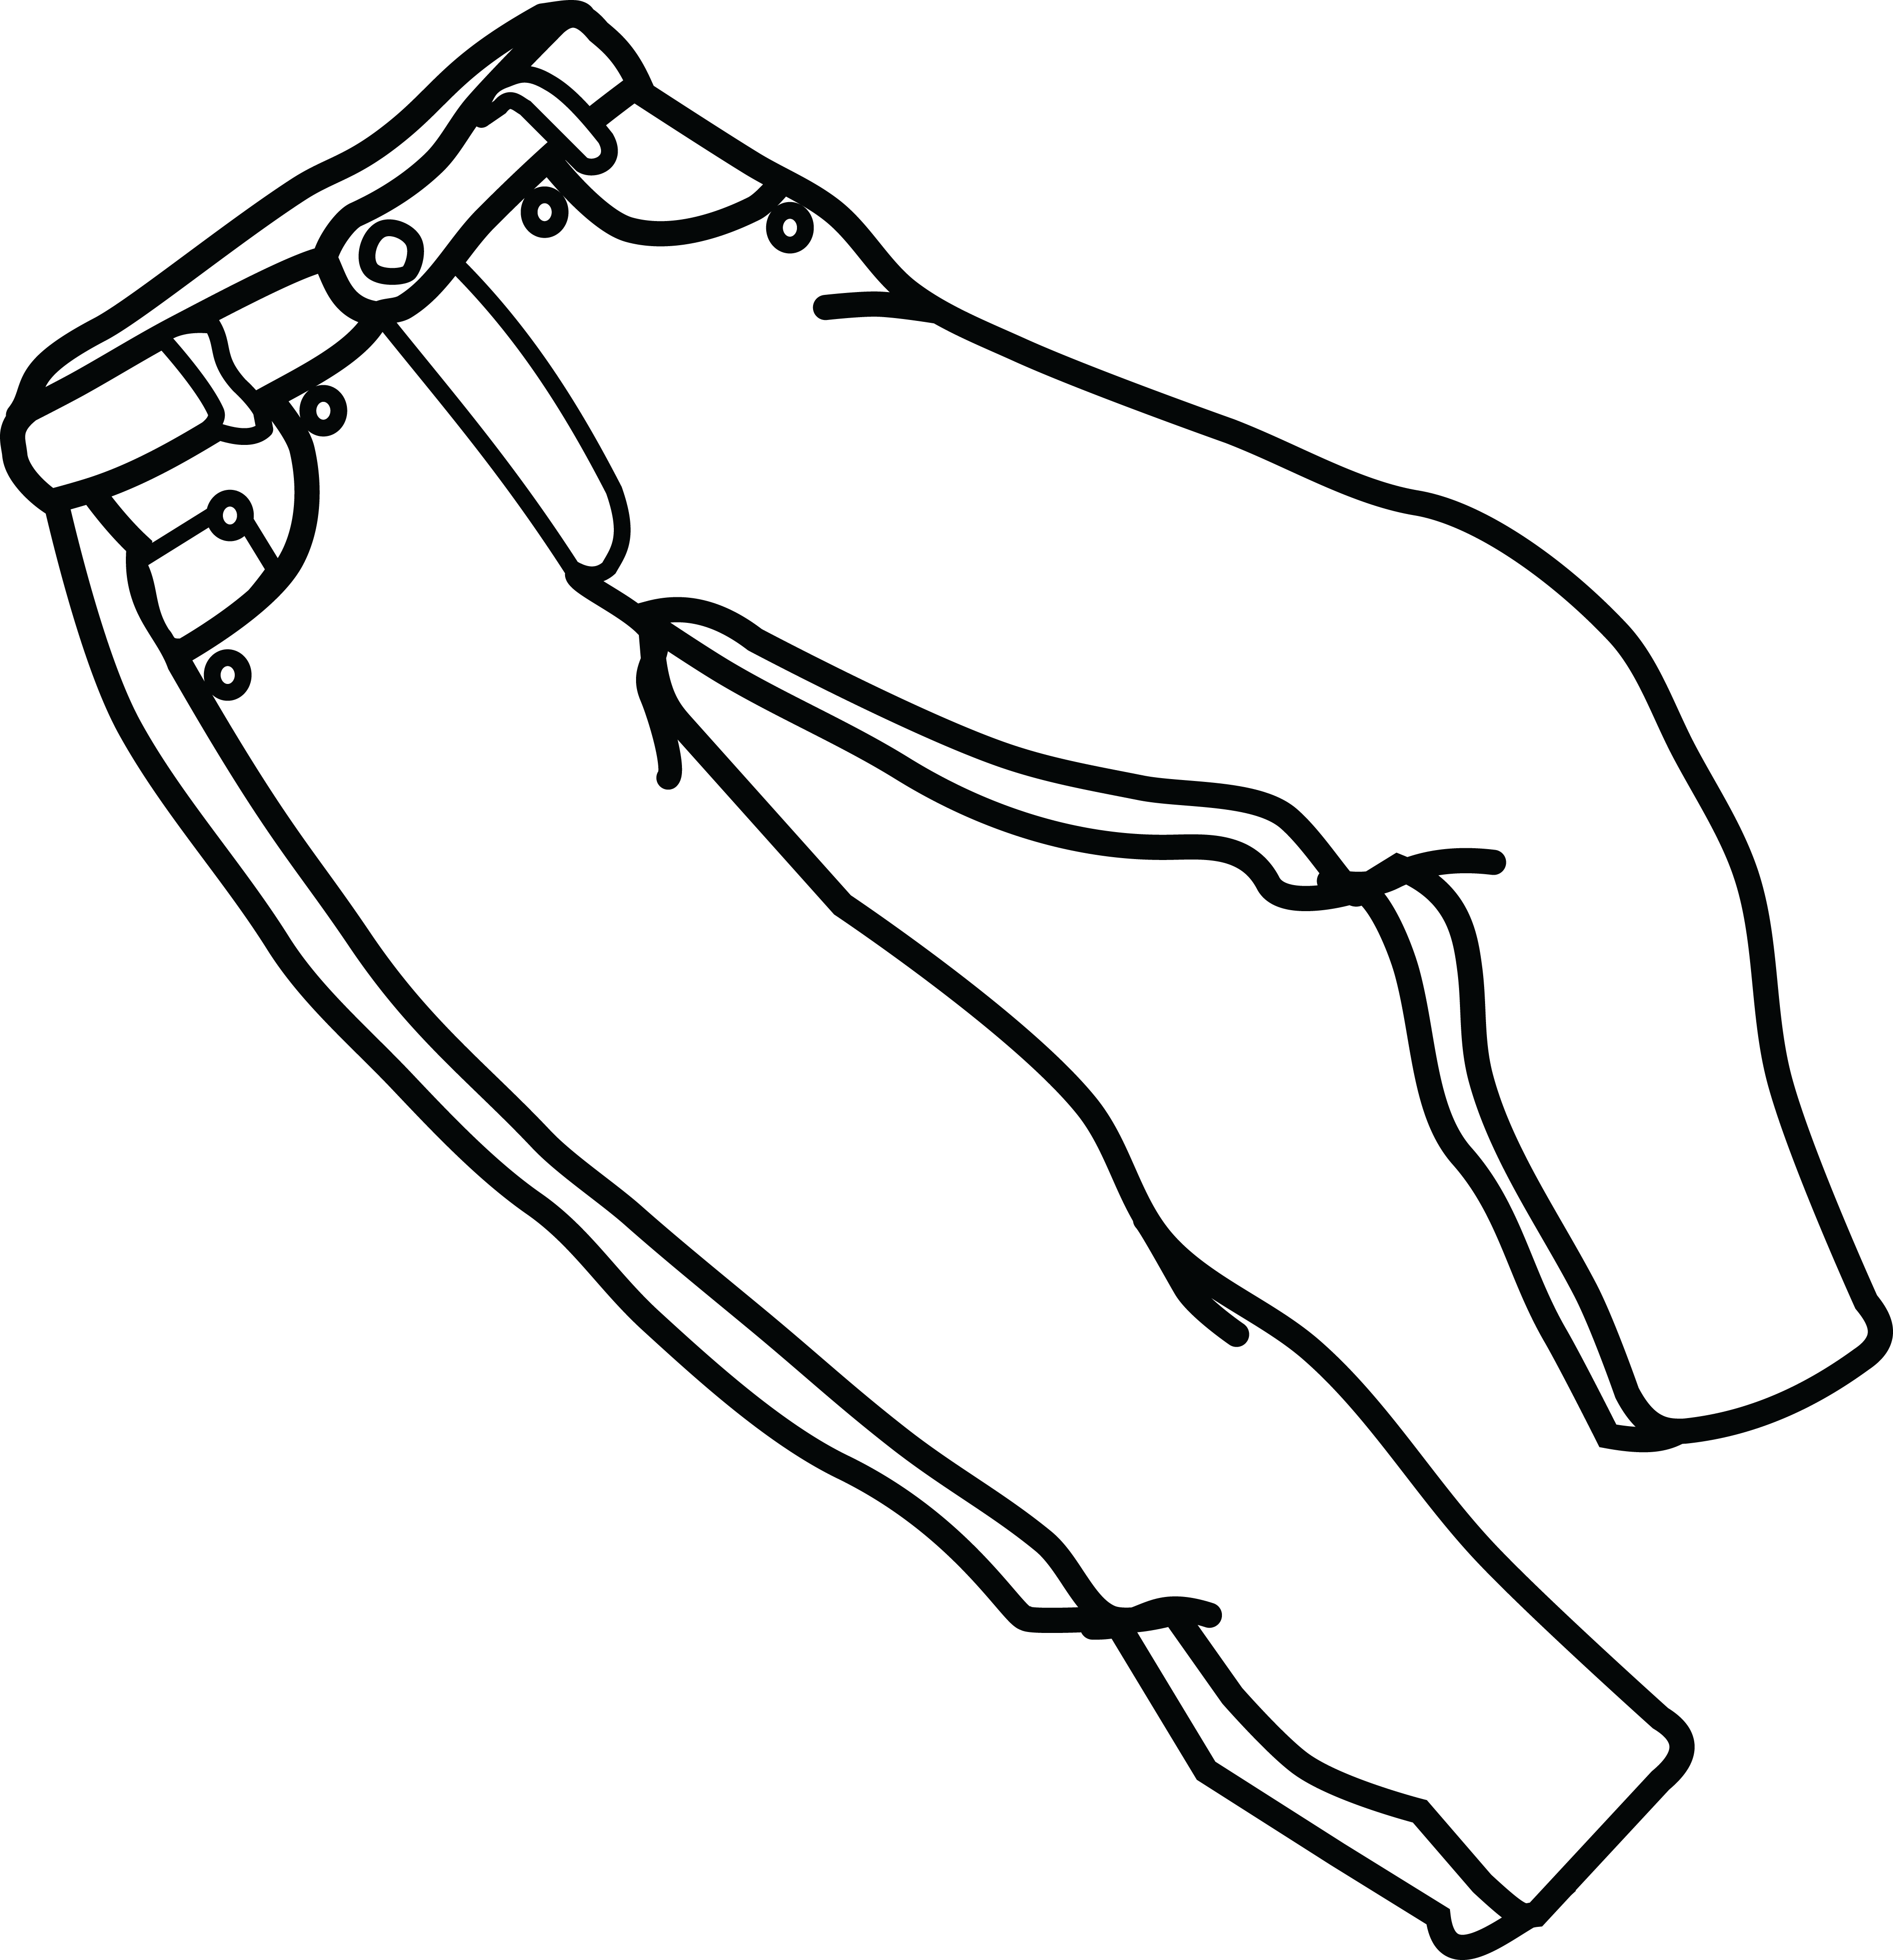 Free Clipart Of A pair of jeans